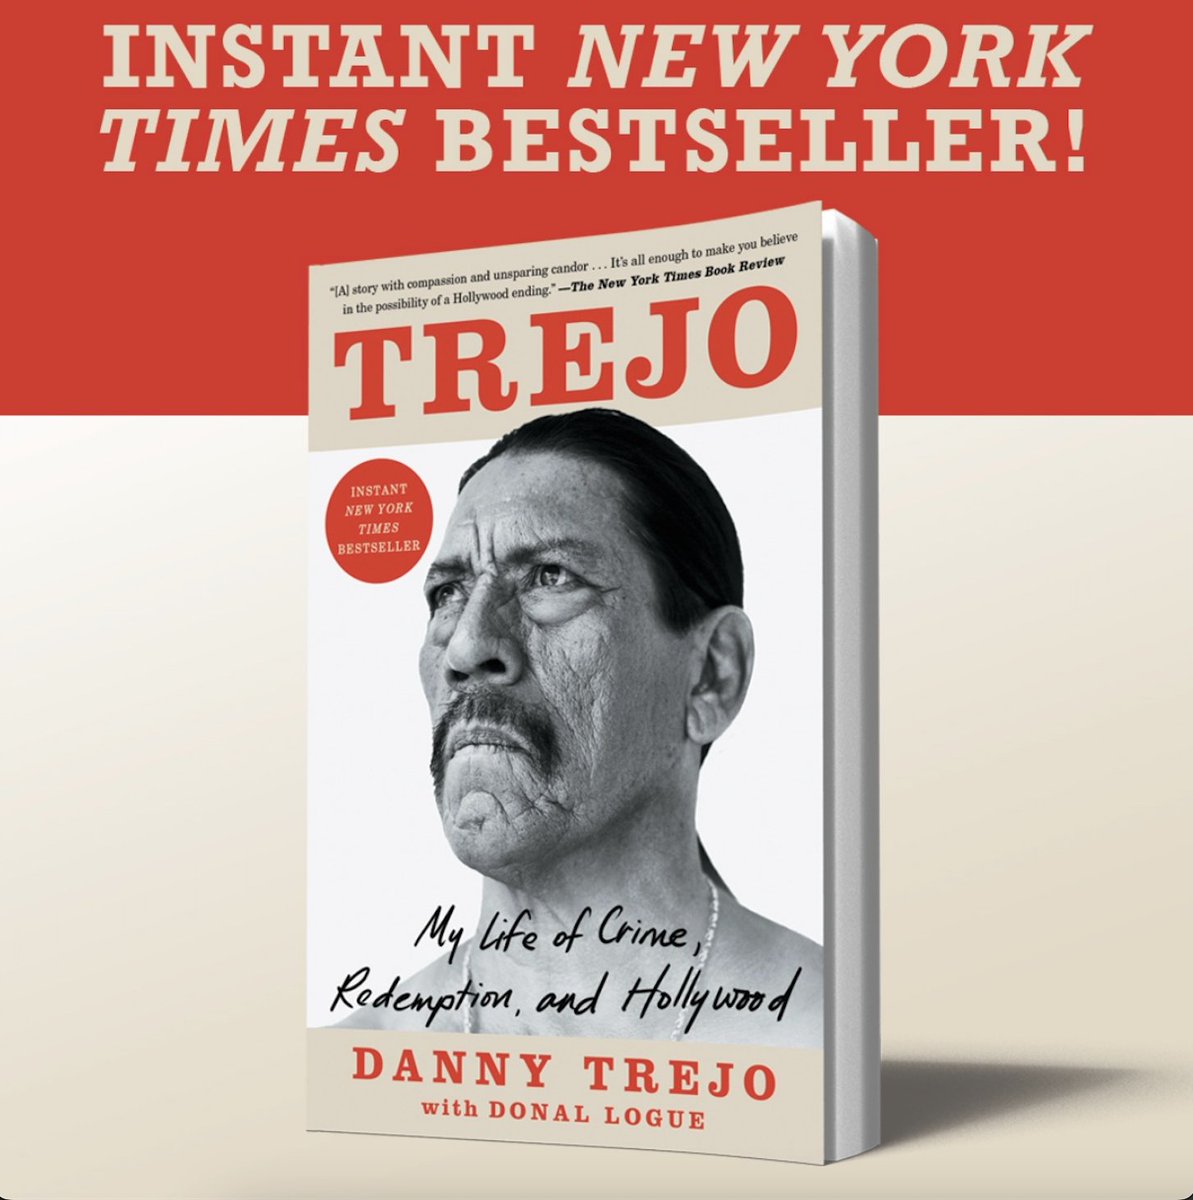 It's 'Trejo' paperback release day.* Danny's story is powerful, inspirational, funny, terrifying, & heart-warming.I know this because I sat w/him for 2 yrs while he told me stories no one (not even his children) had ever heard before. He's a treasure. *Where all books are sold